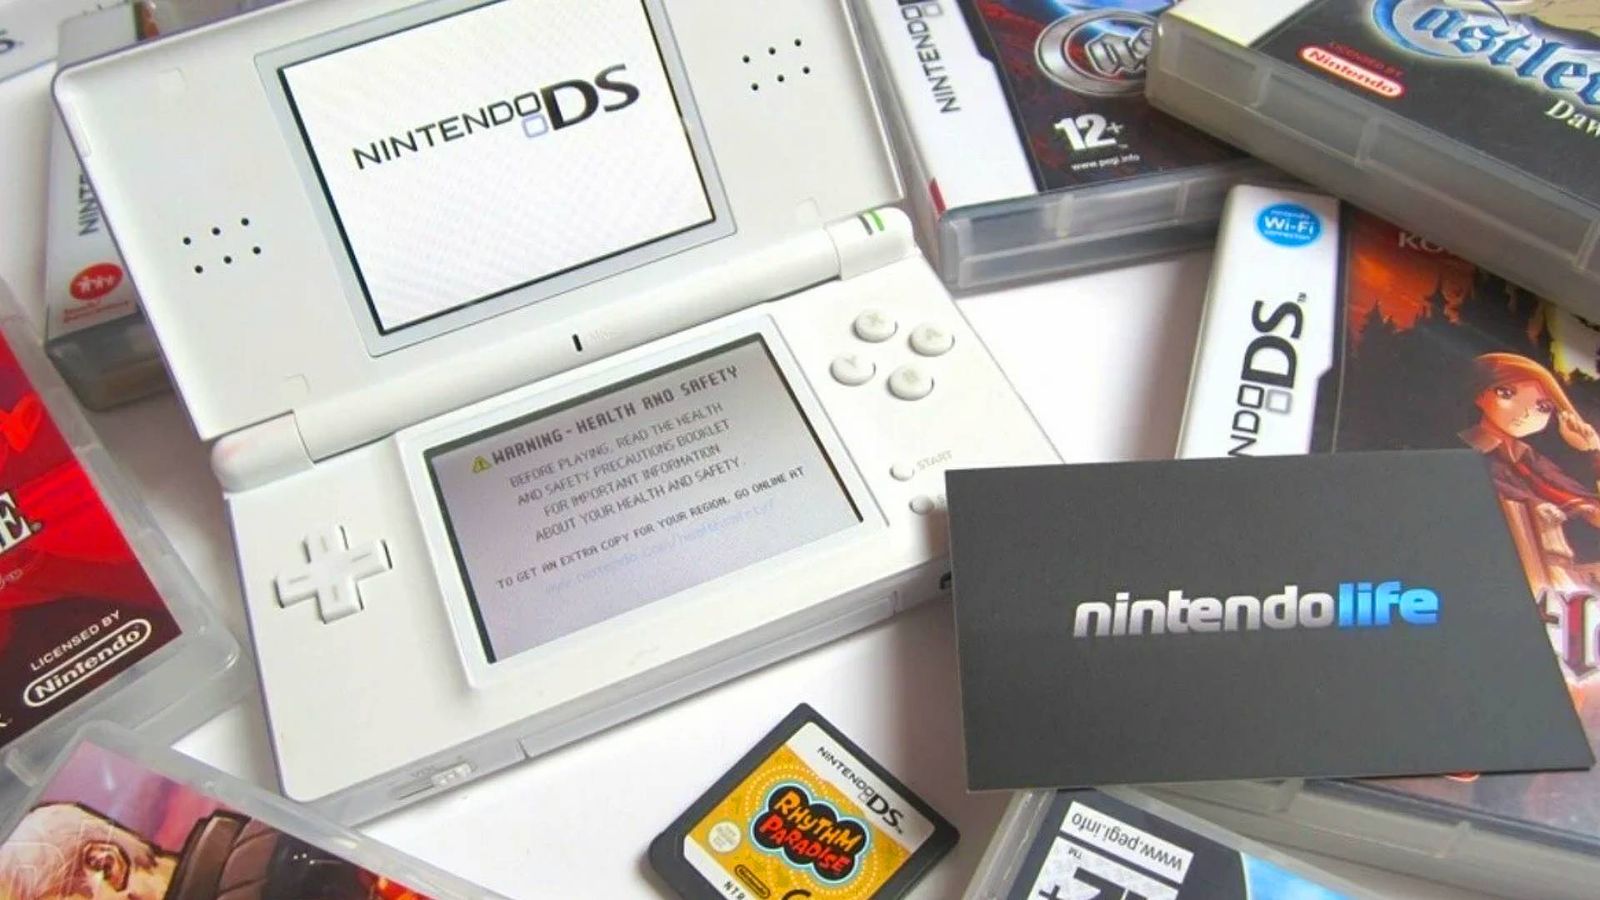 The Nintendo DS and several game cartridges